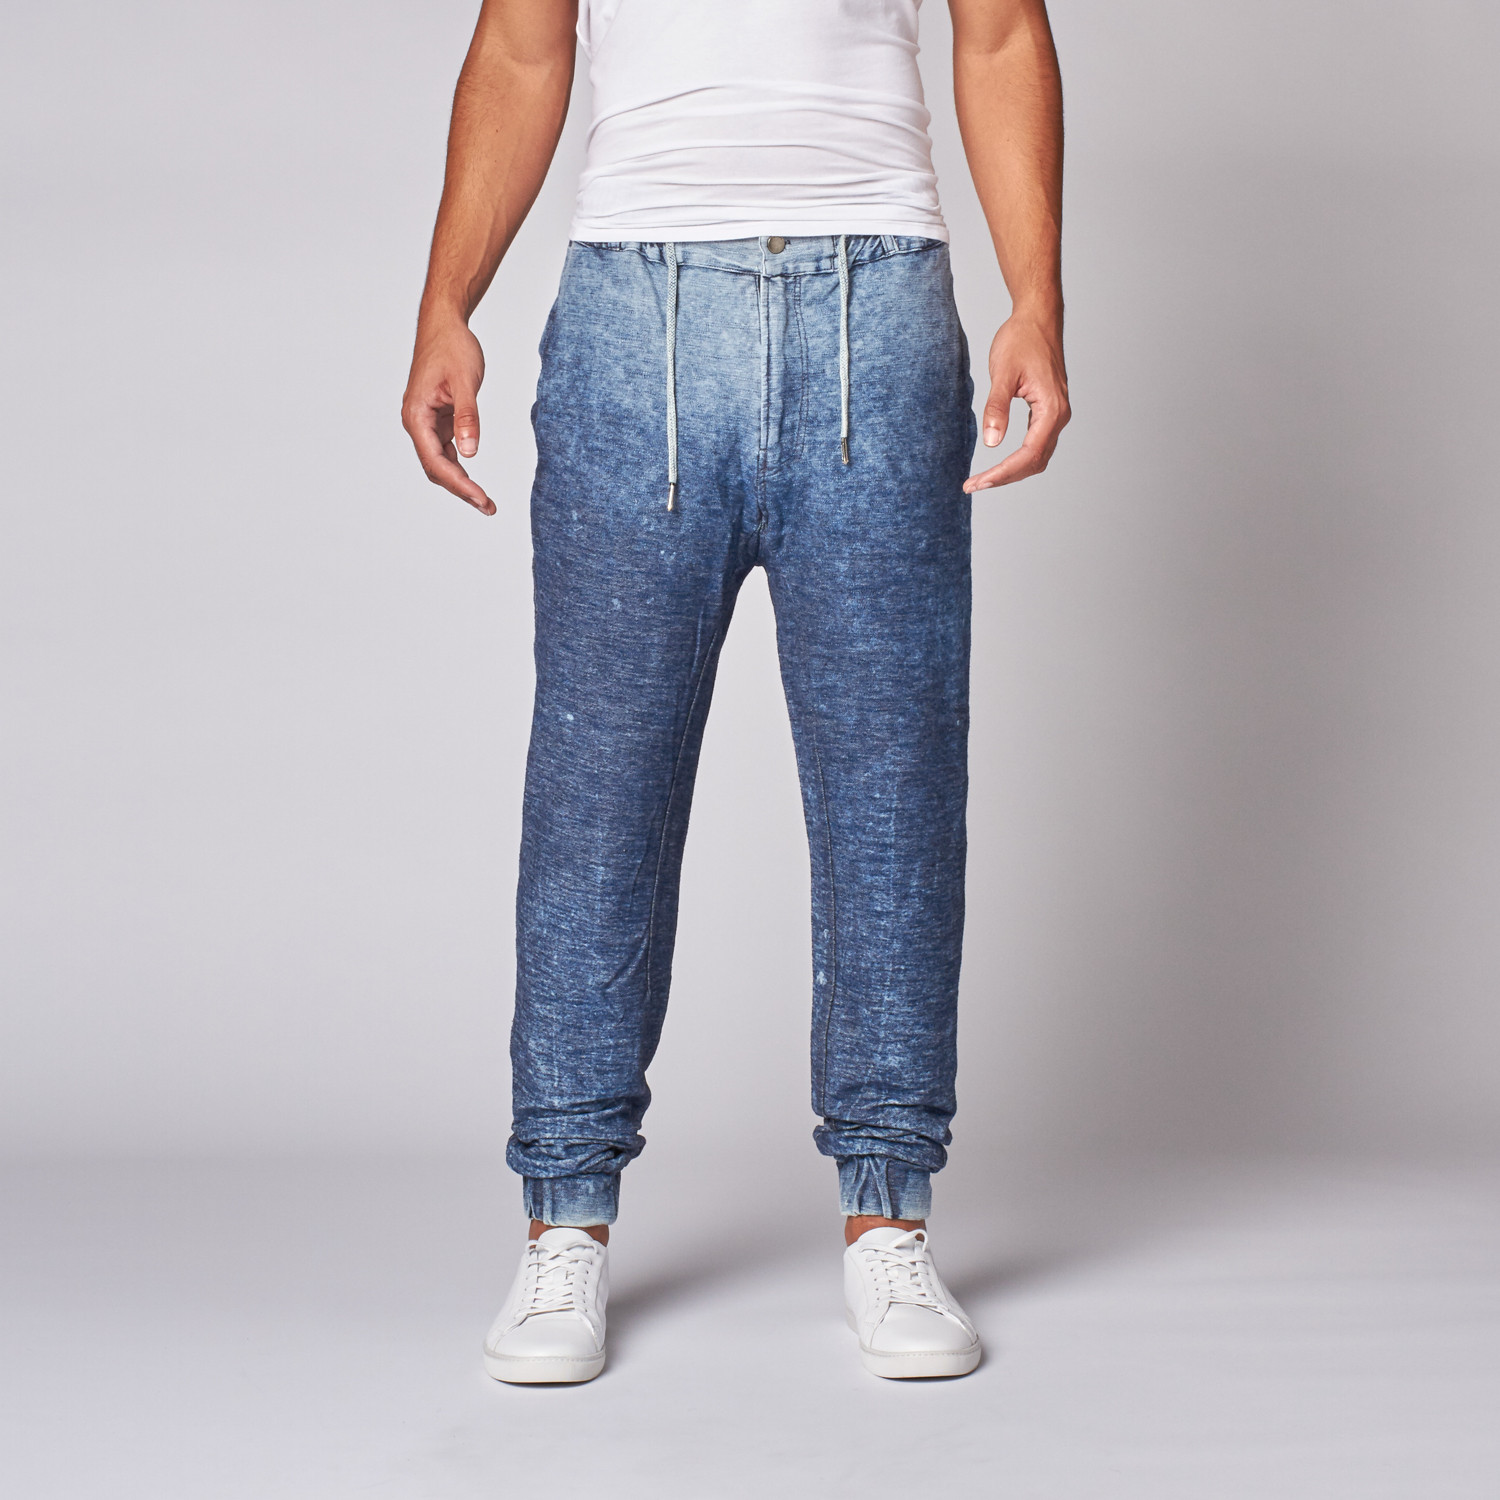 Denim Printed Joggers // Blue (S) - X Ray Jeans - Touch of Modern